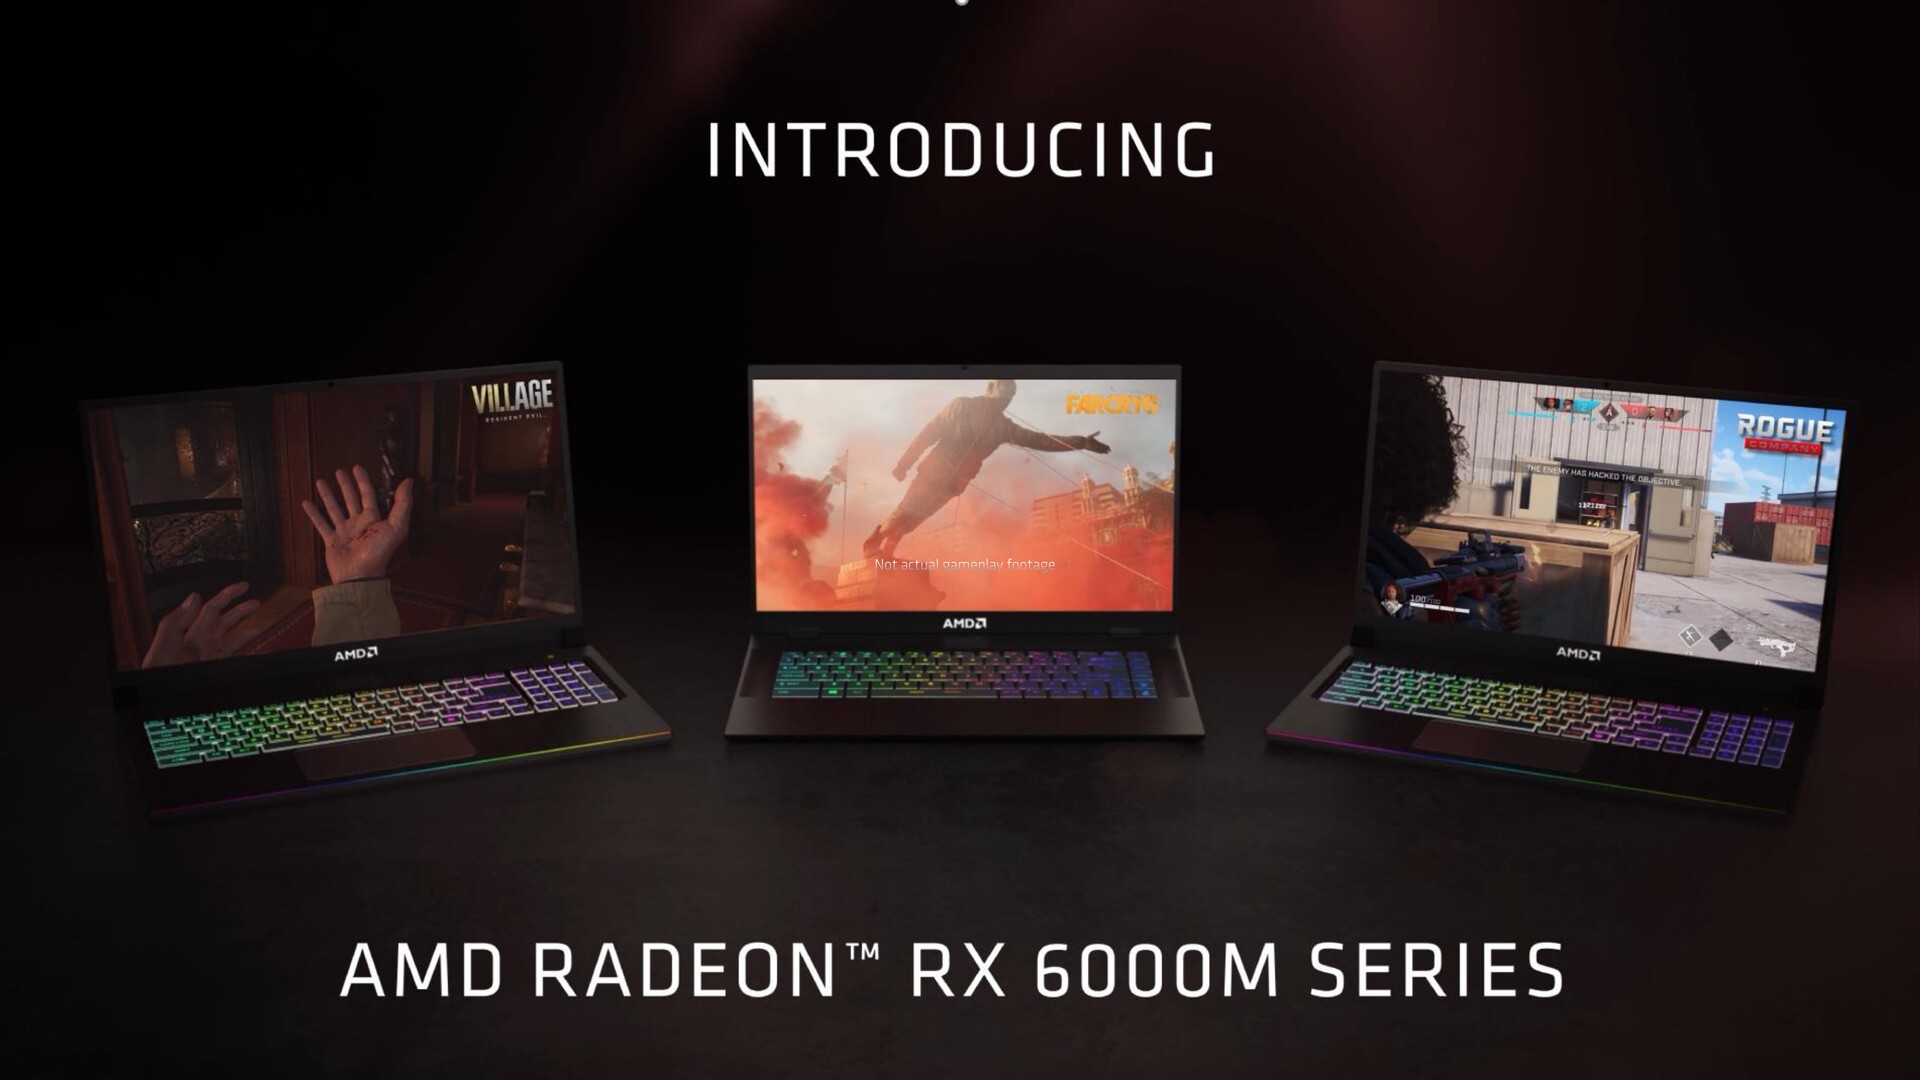 The Radeon RX 6000 family also comes with laptops